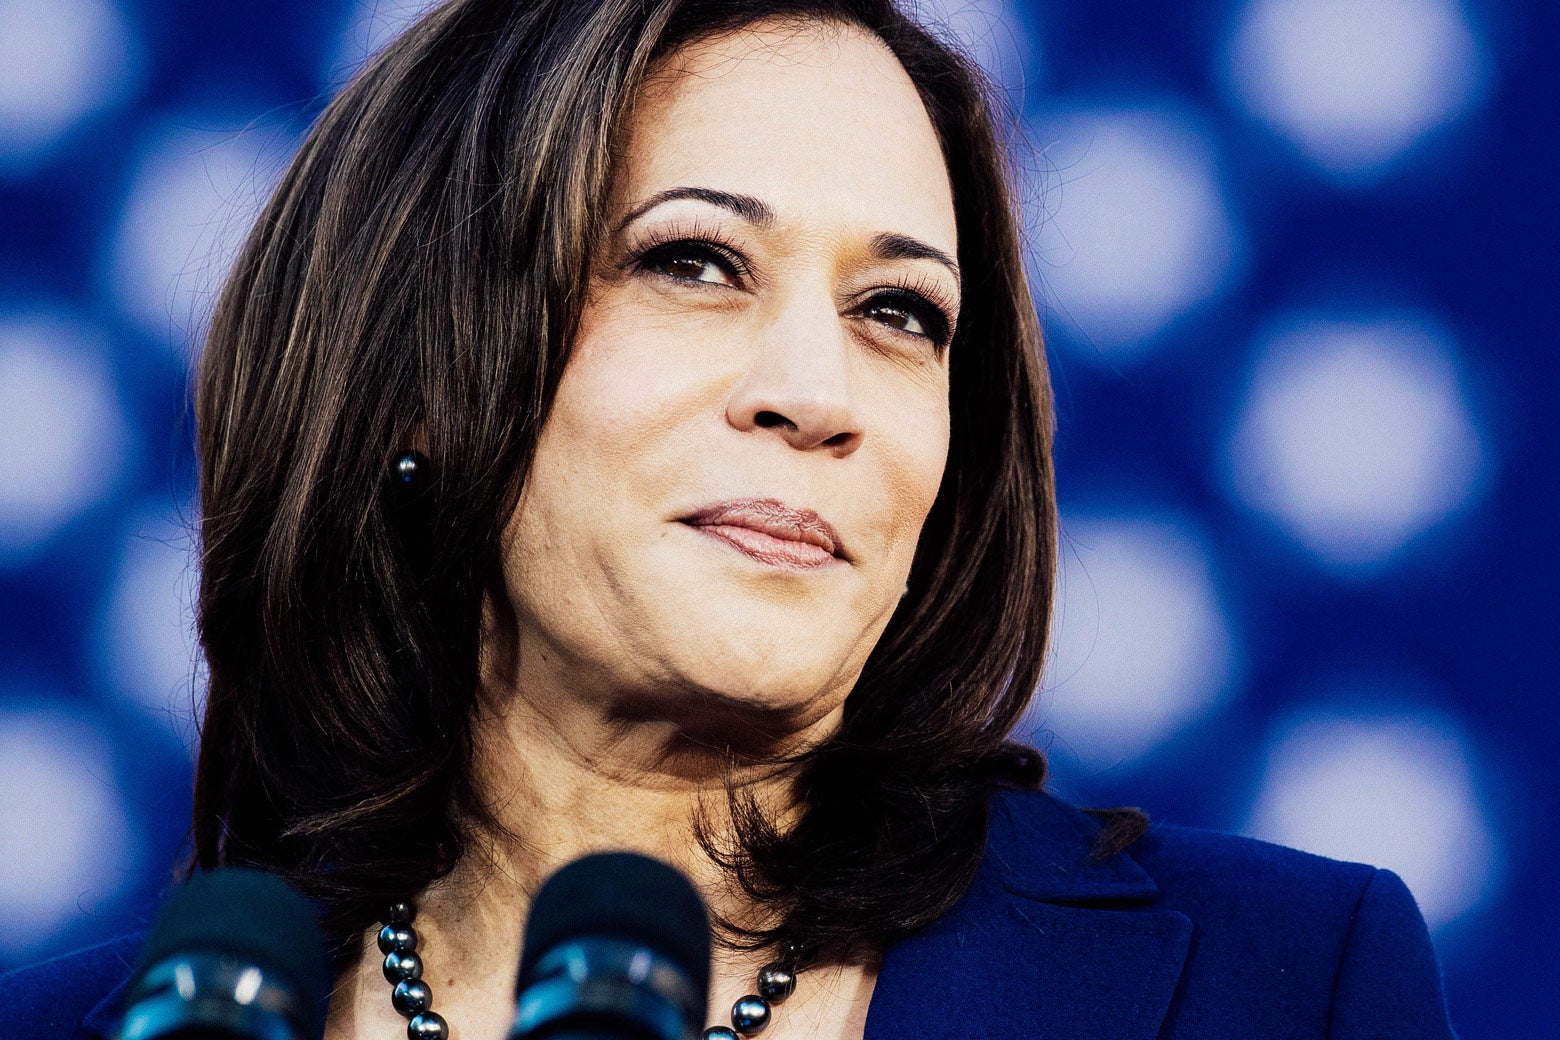 California Sen. Kamala Harris speaks during a rally launching her presidential campaign on Sunday in Oakland.